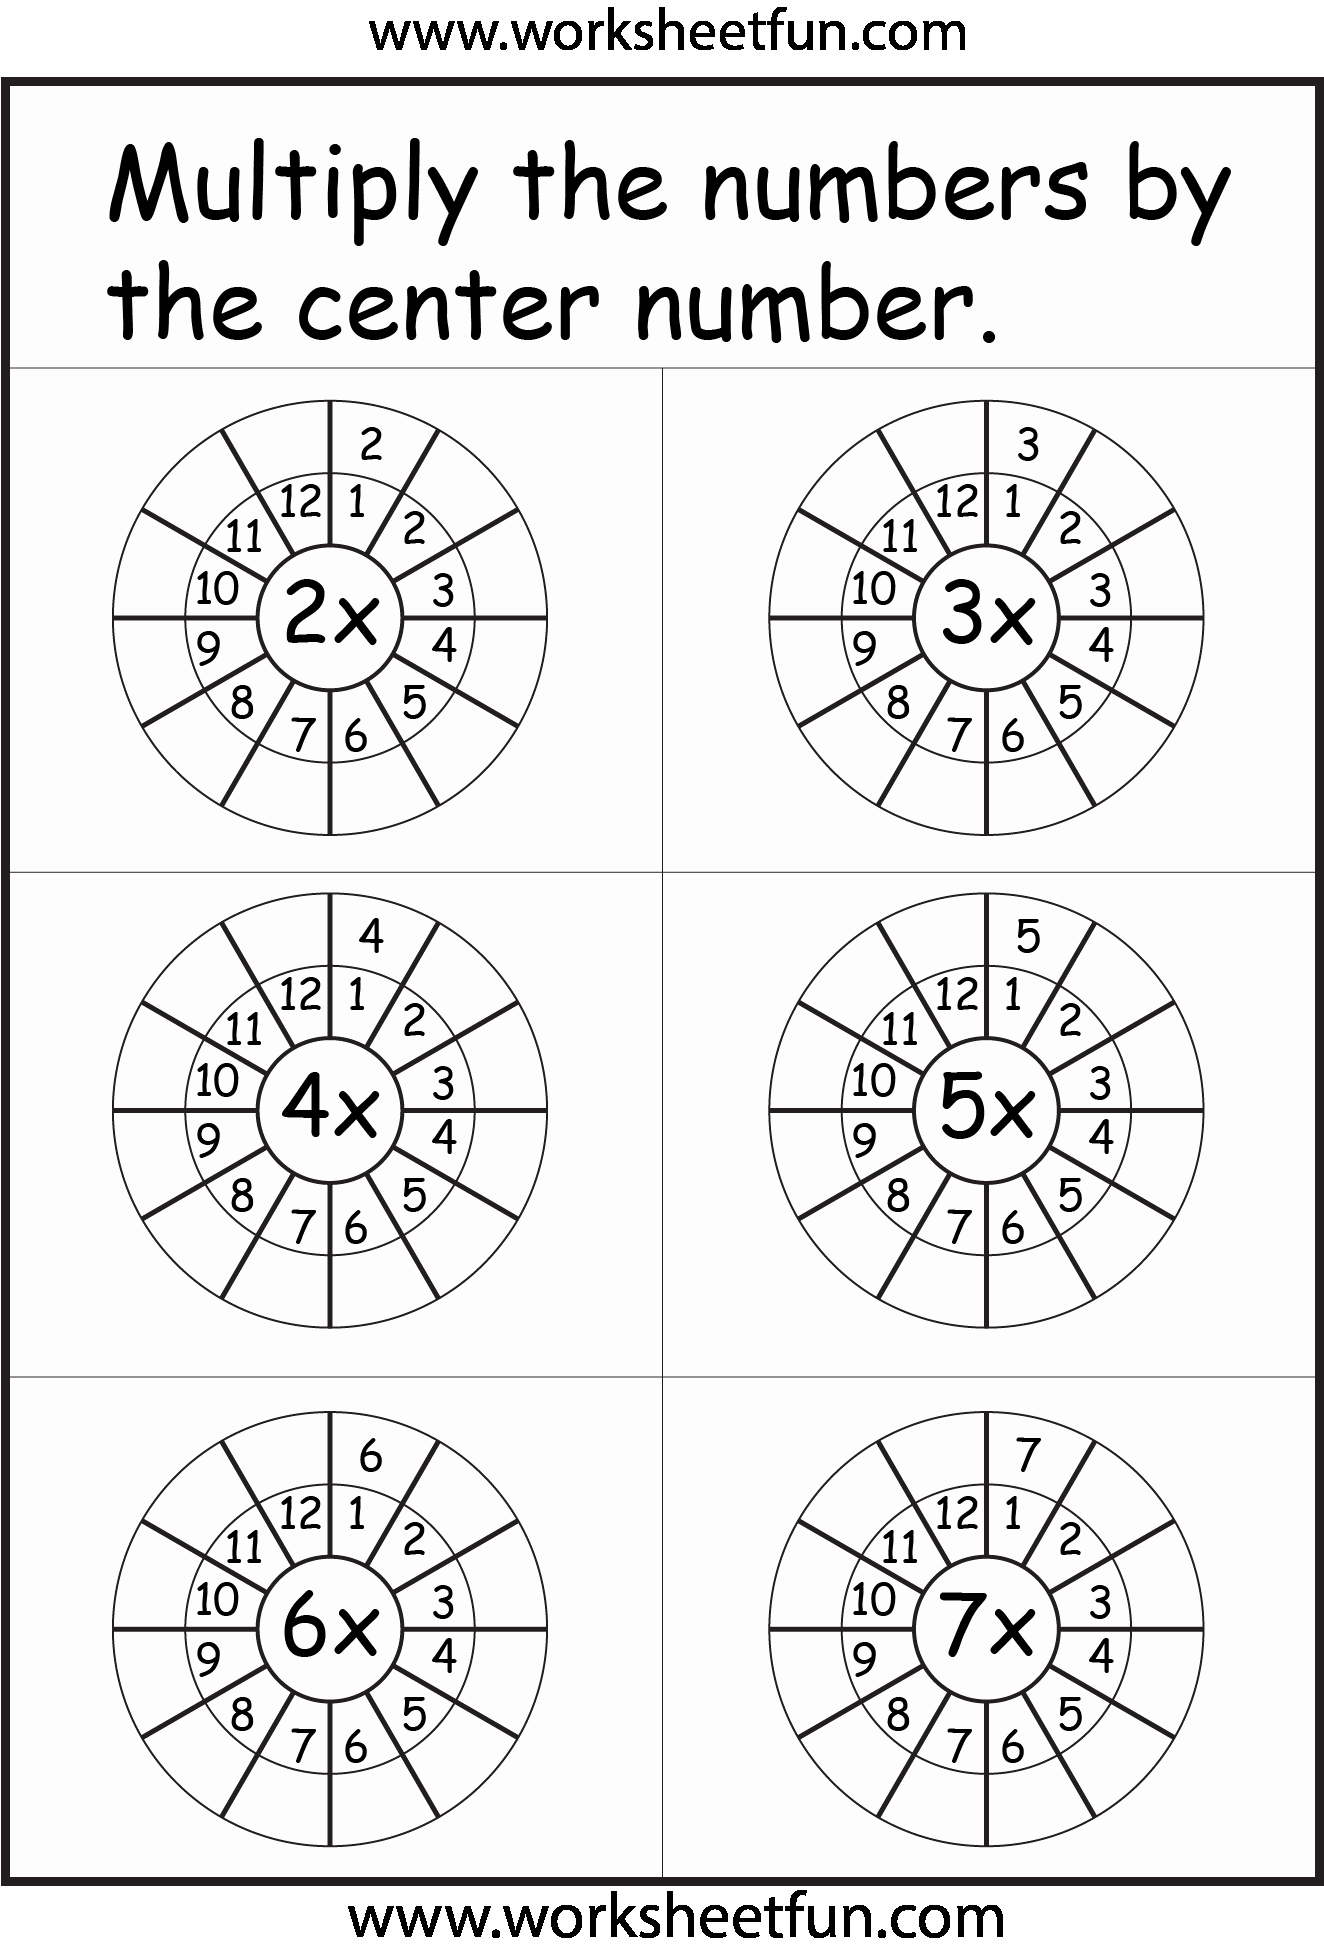 6 Times Table Worksheet Inspirational Times Table Worksheets – 1 2 3 4 5 6 7 8 9 10 11